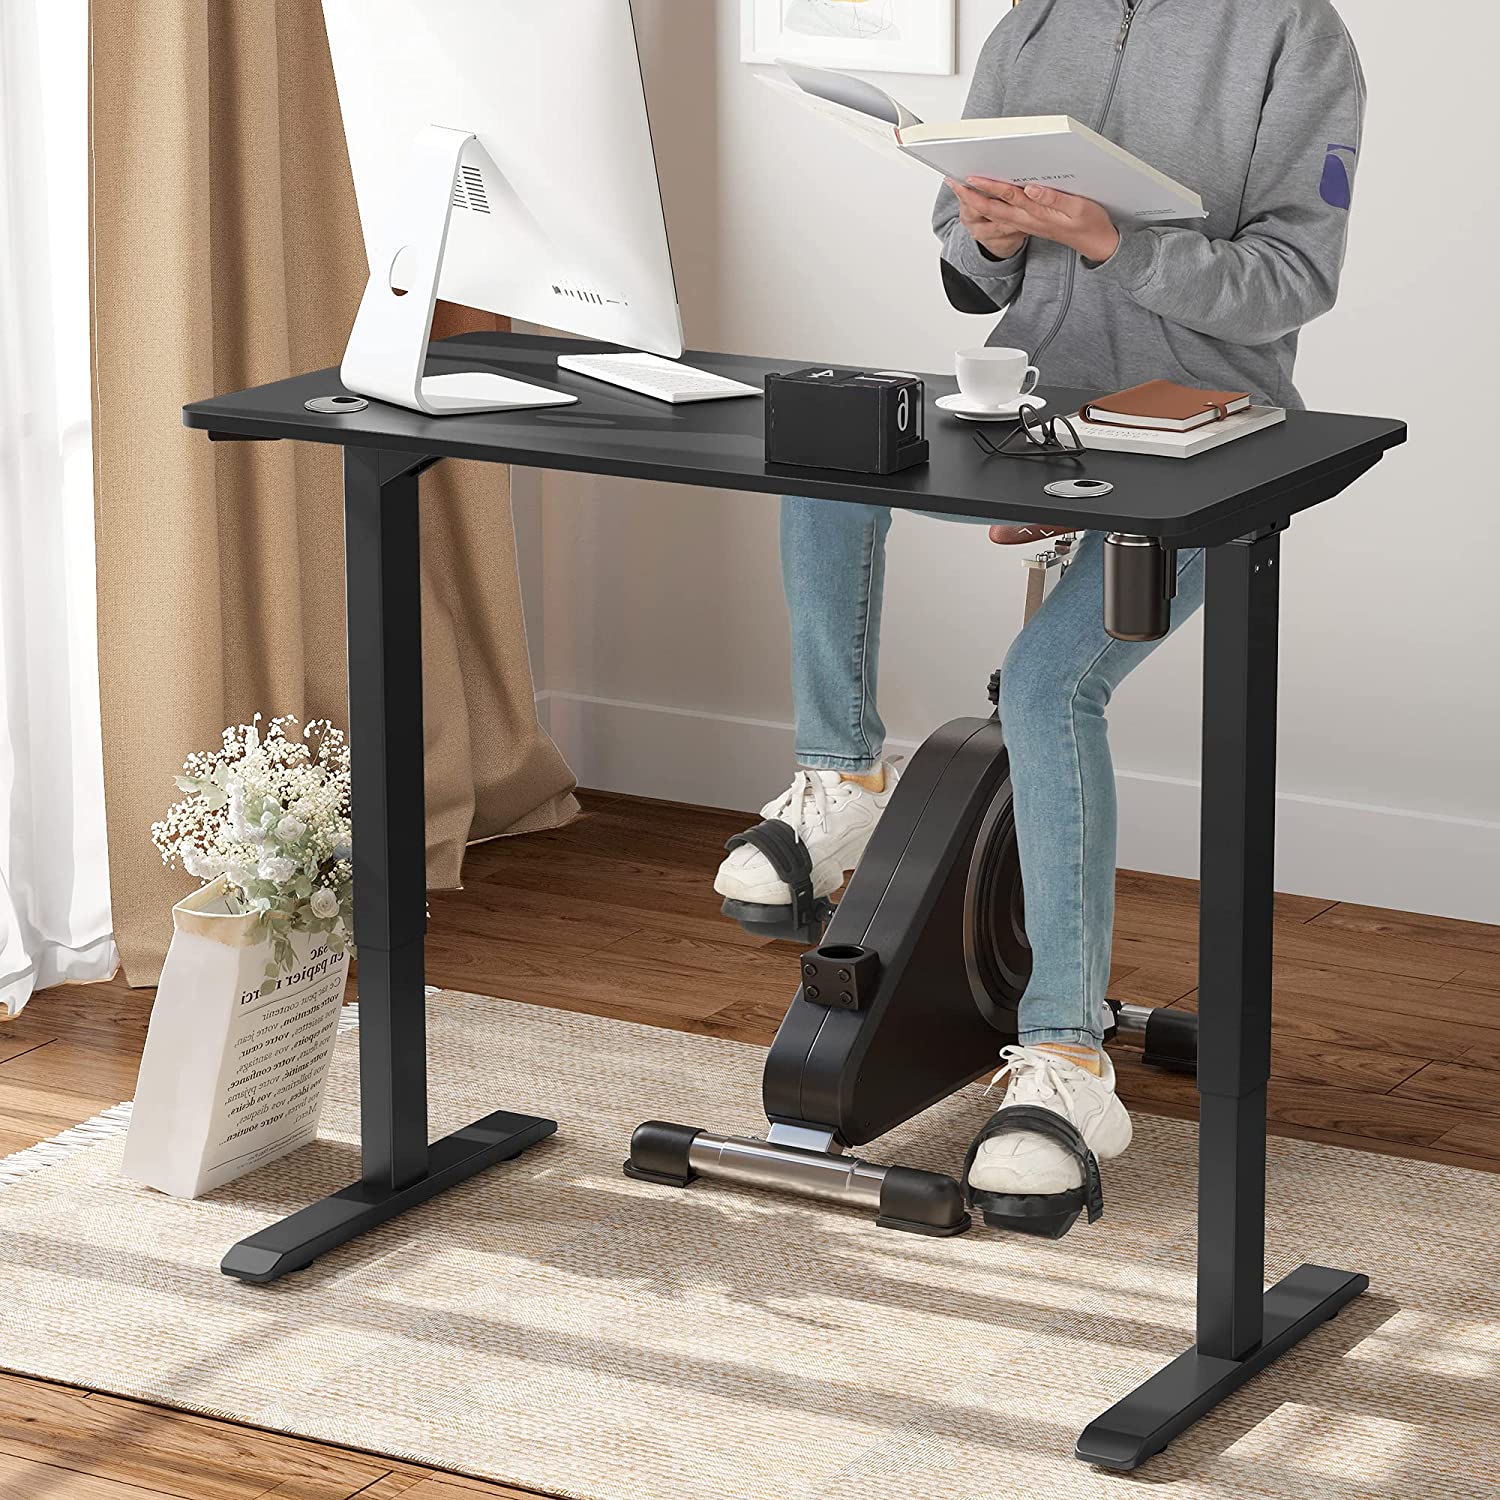 Nancy's Gaskiers Desk - Height Adjustable - Sit-stand-table - Automatic - Cable management - Office table - Black/White - MDF - Steel - 120 x 60 x (73-114)